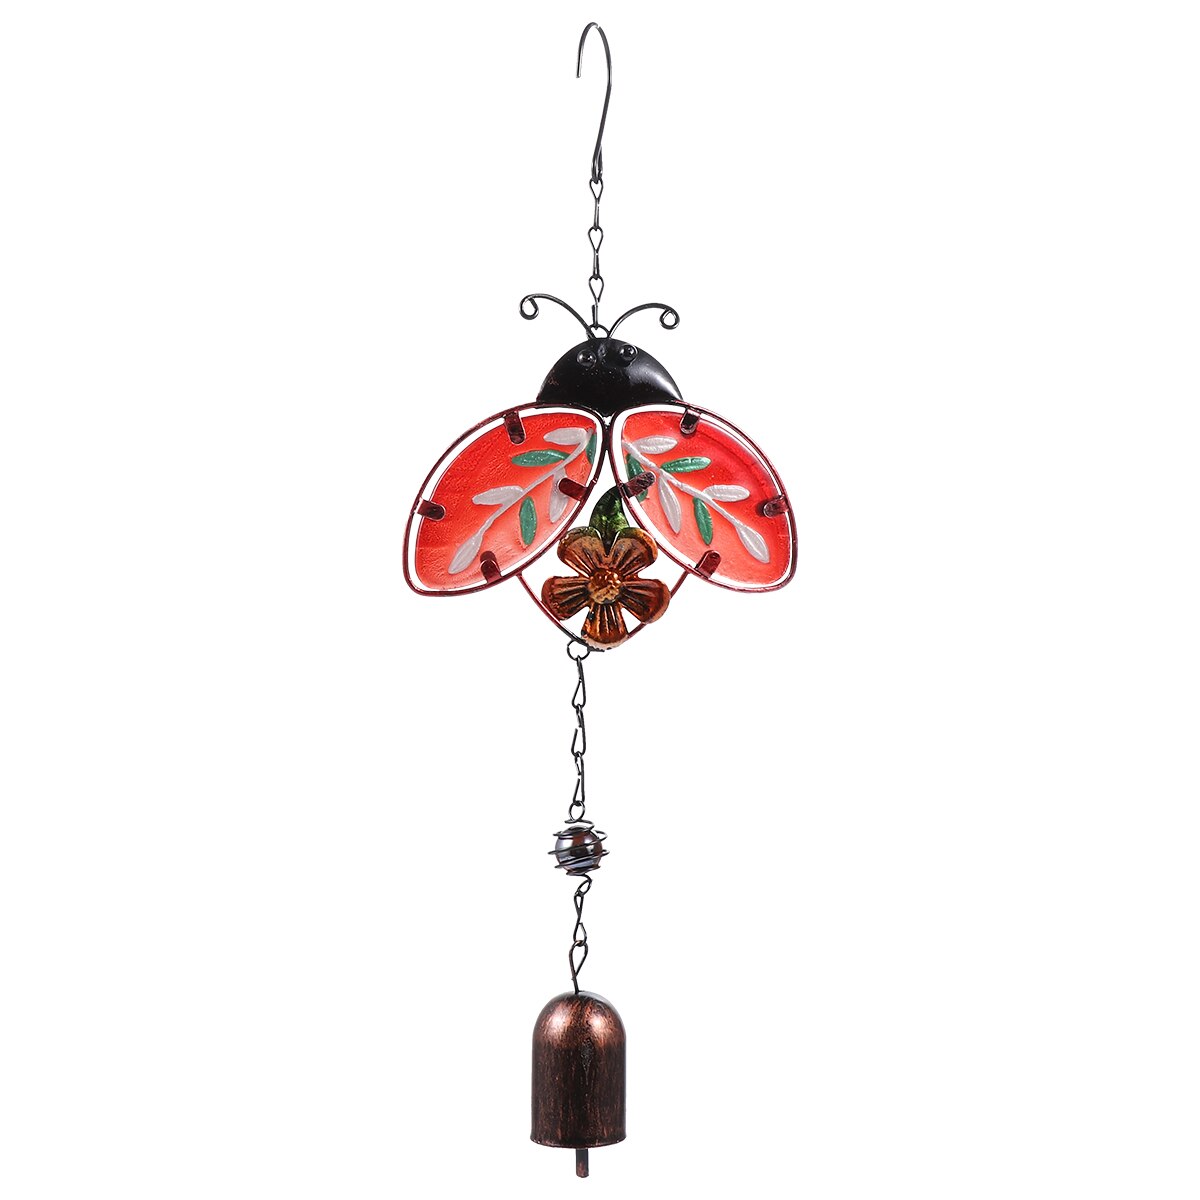 1Pc Wind Chime Hanger Opknoping Decor Insect Wind Chime Voor Kamer